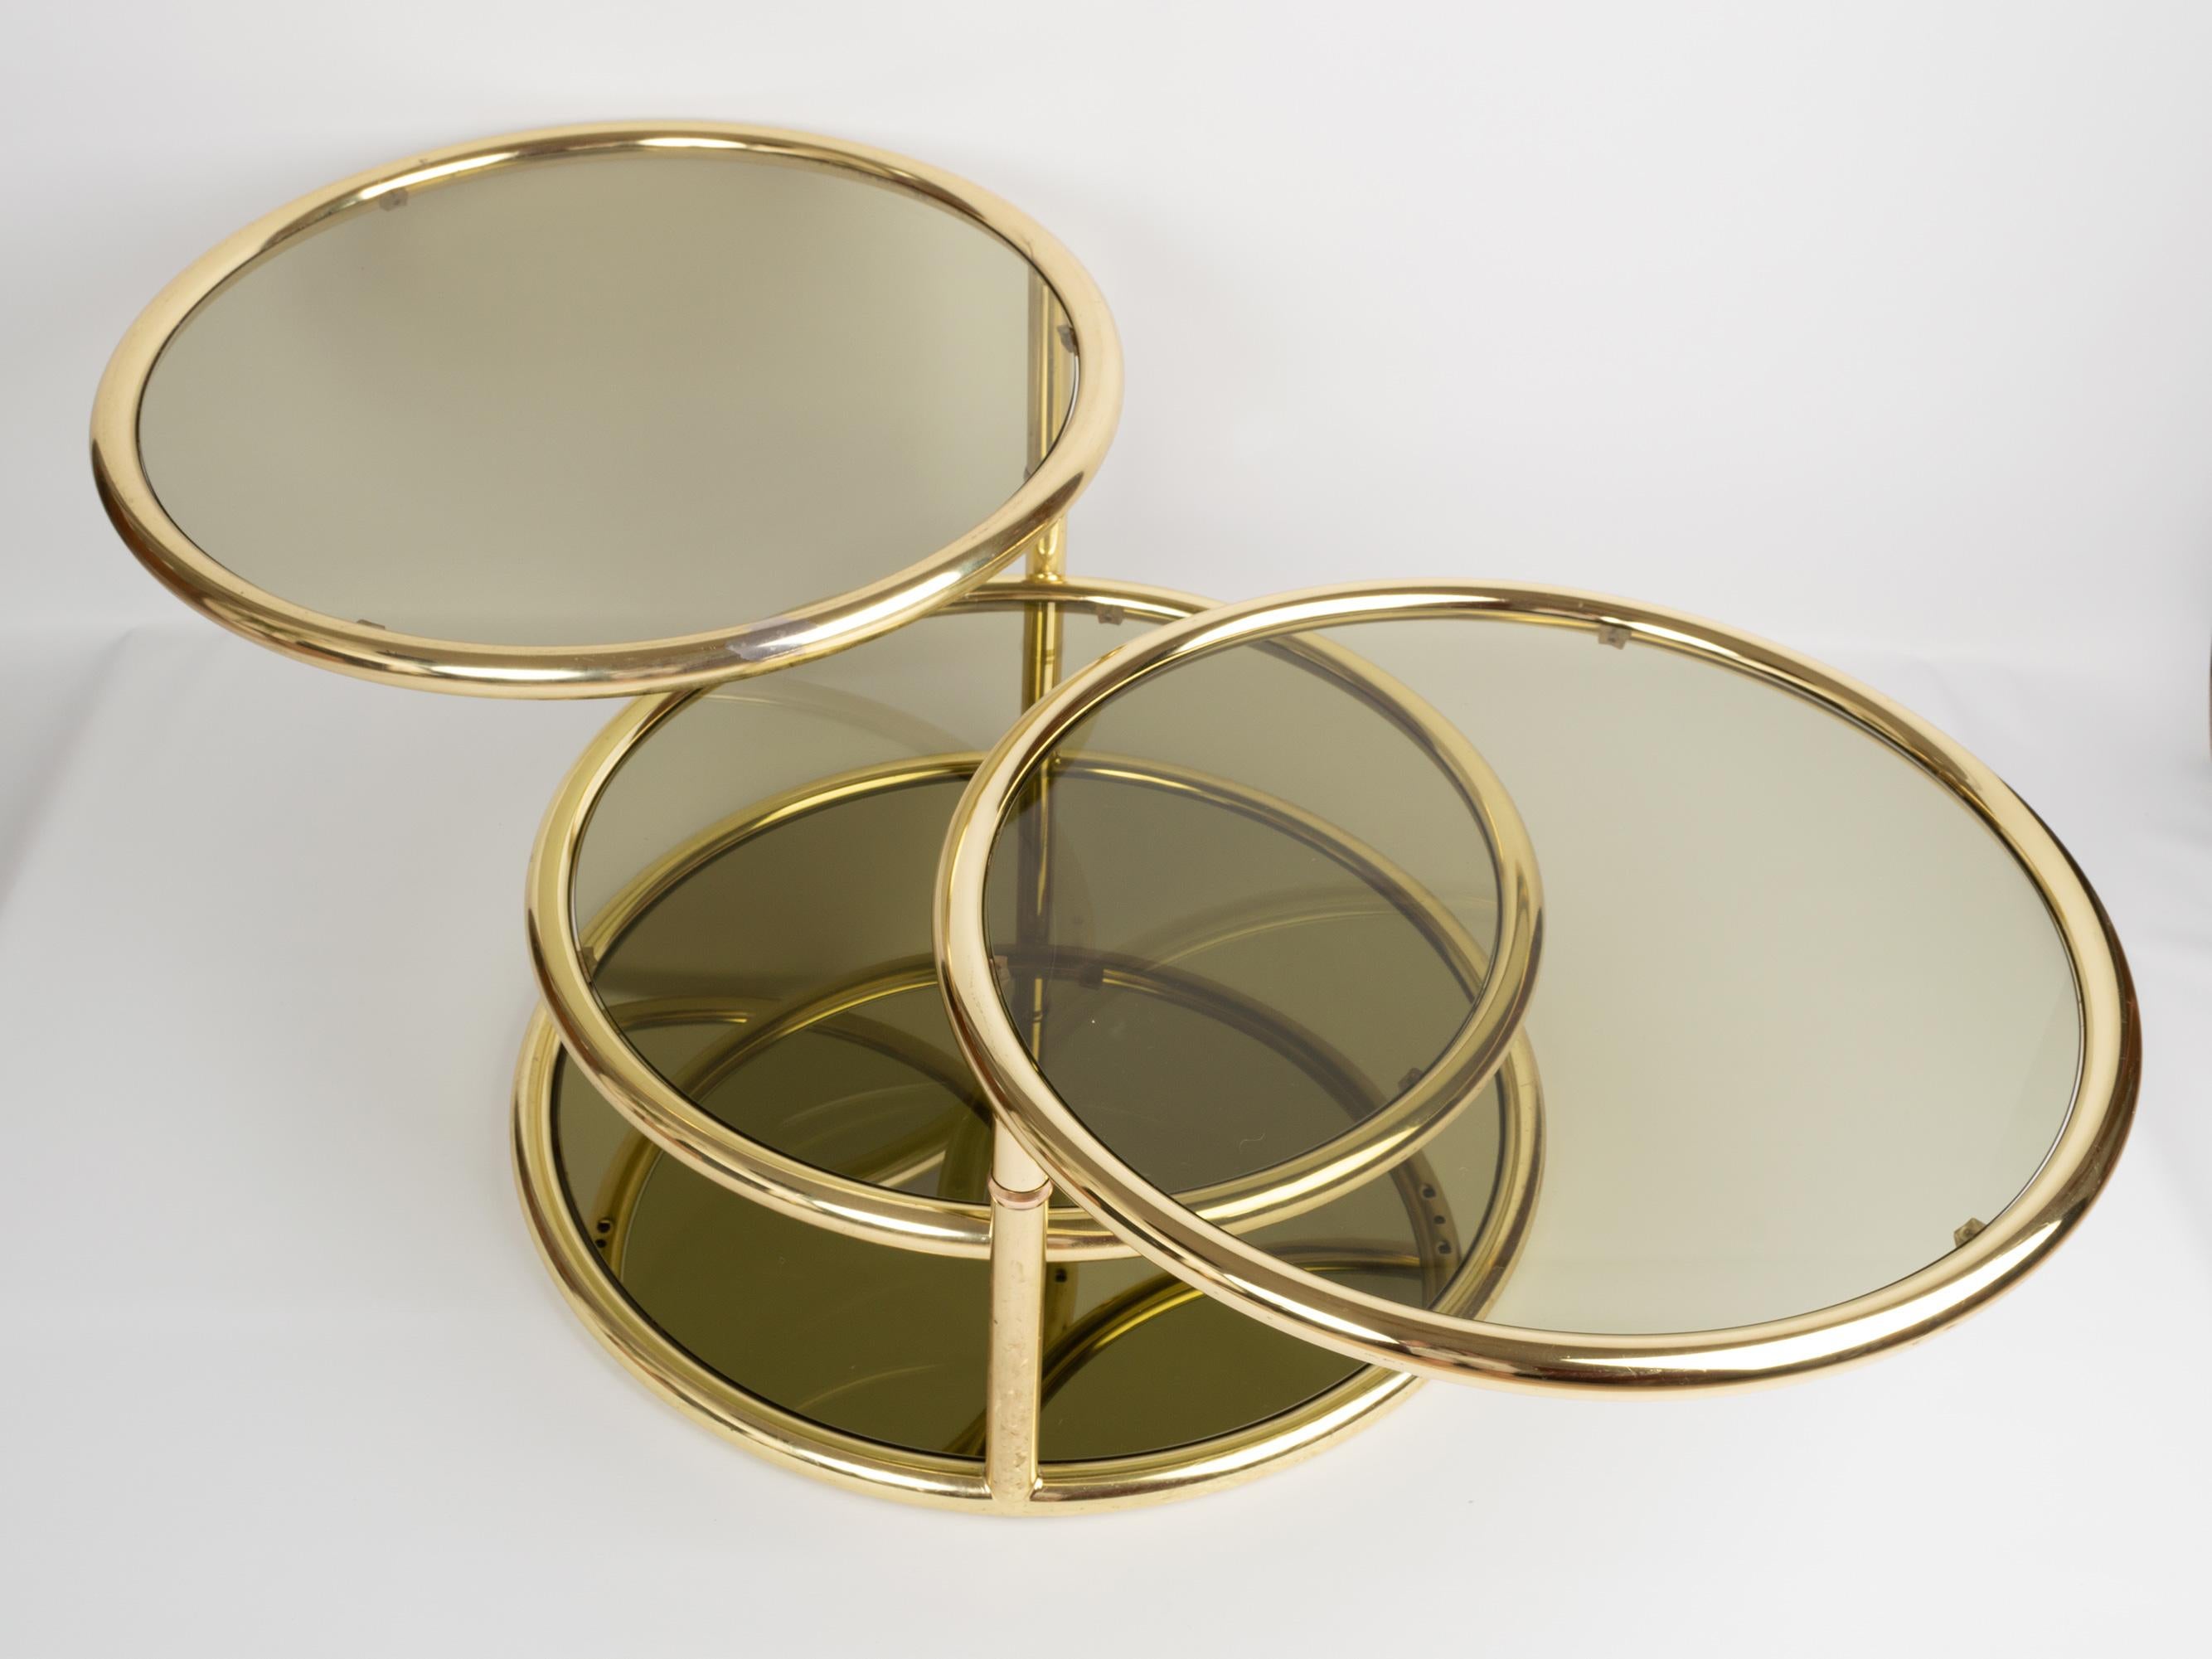 Smoked Glass Midcentury Circular Brass Swivel Tiered Coffee Cocktail Table, attributed to DIA For Sale